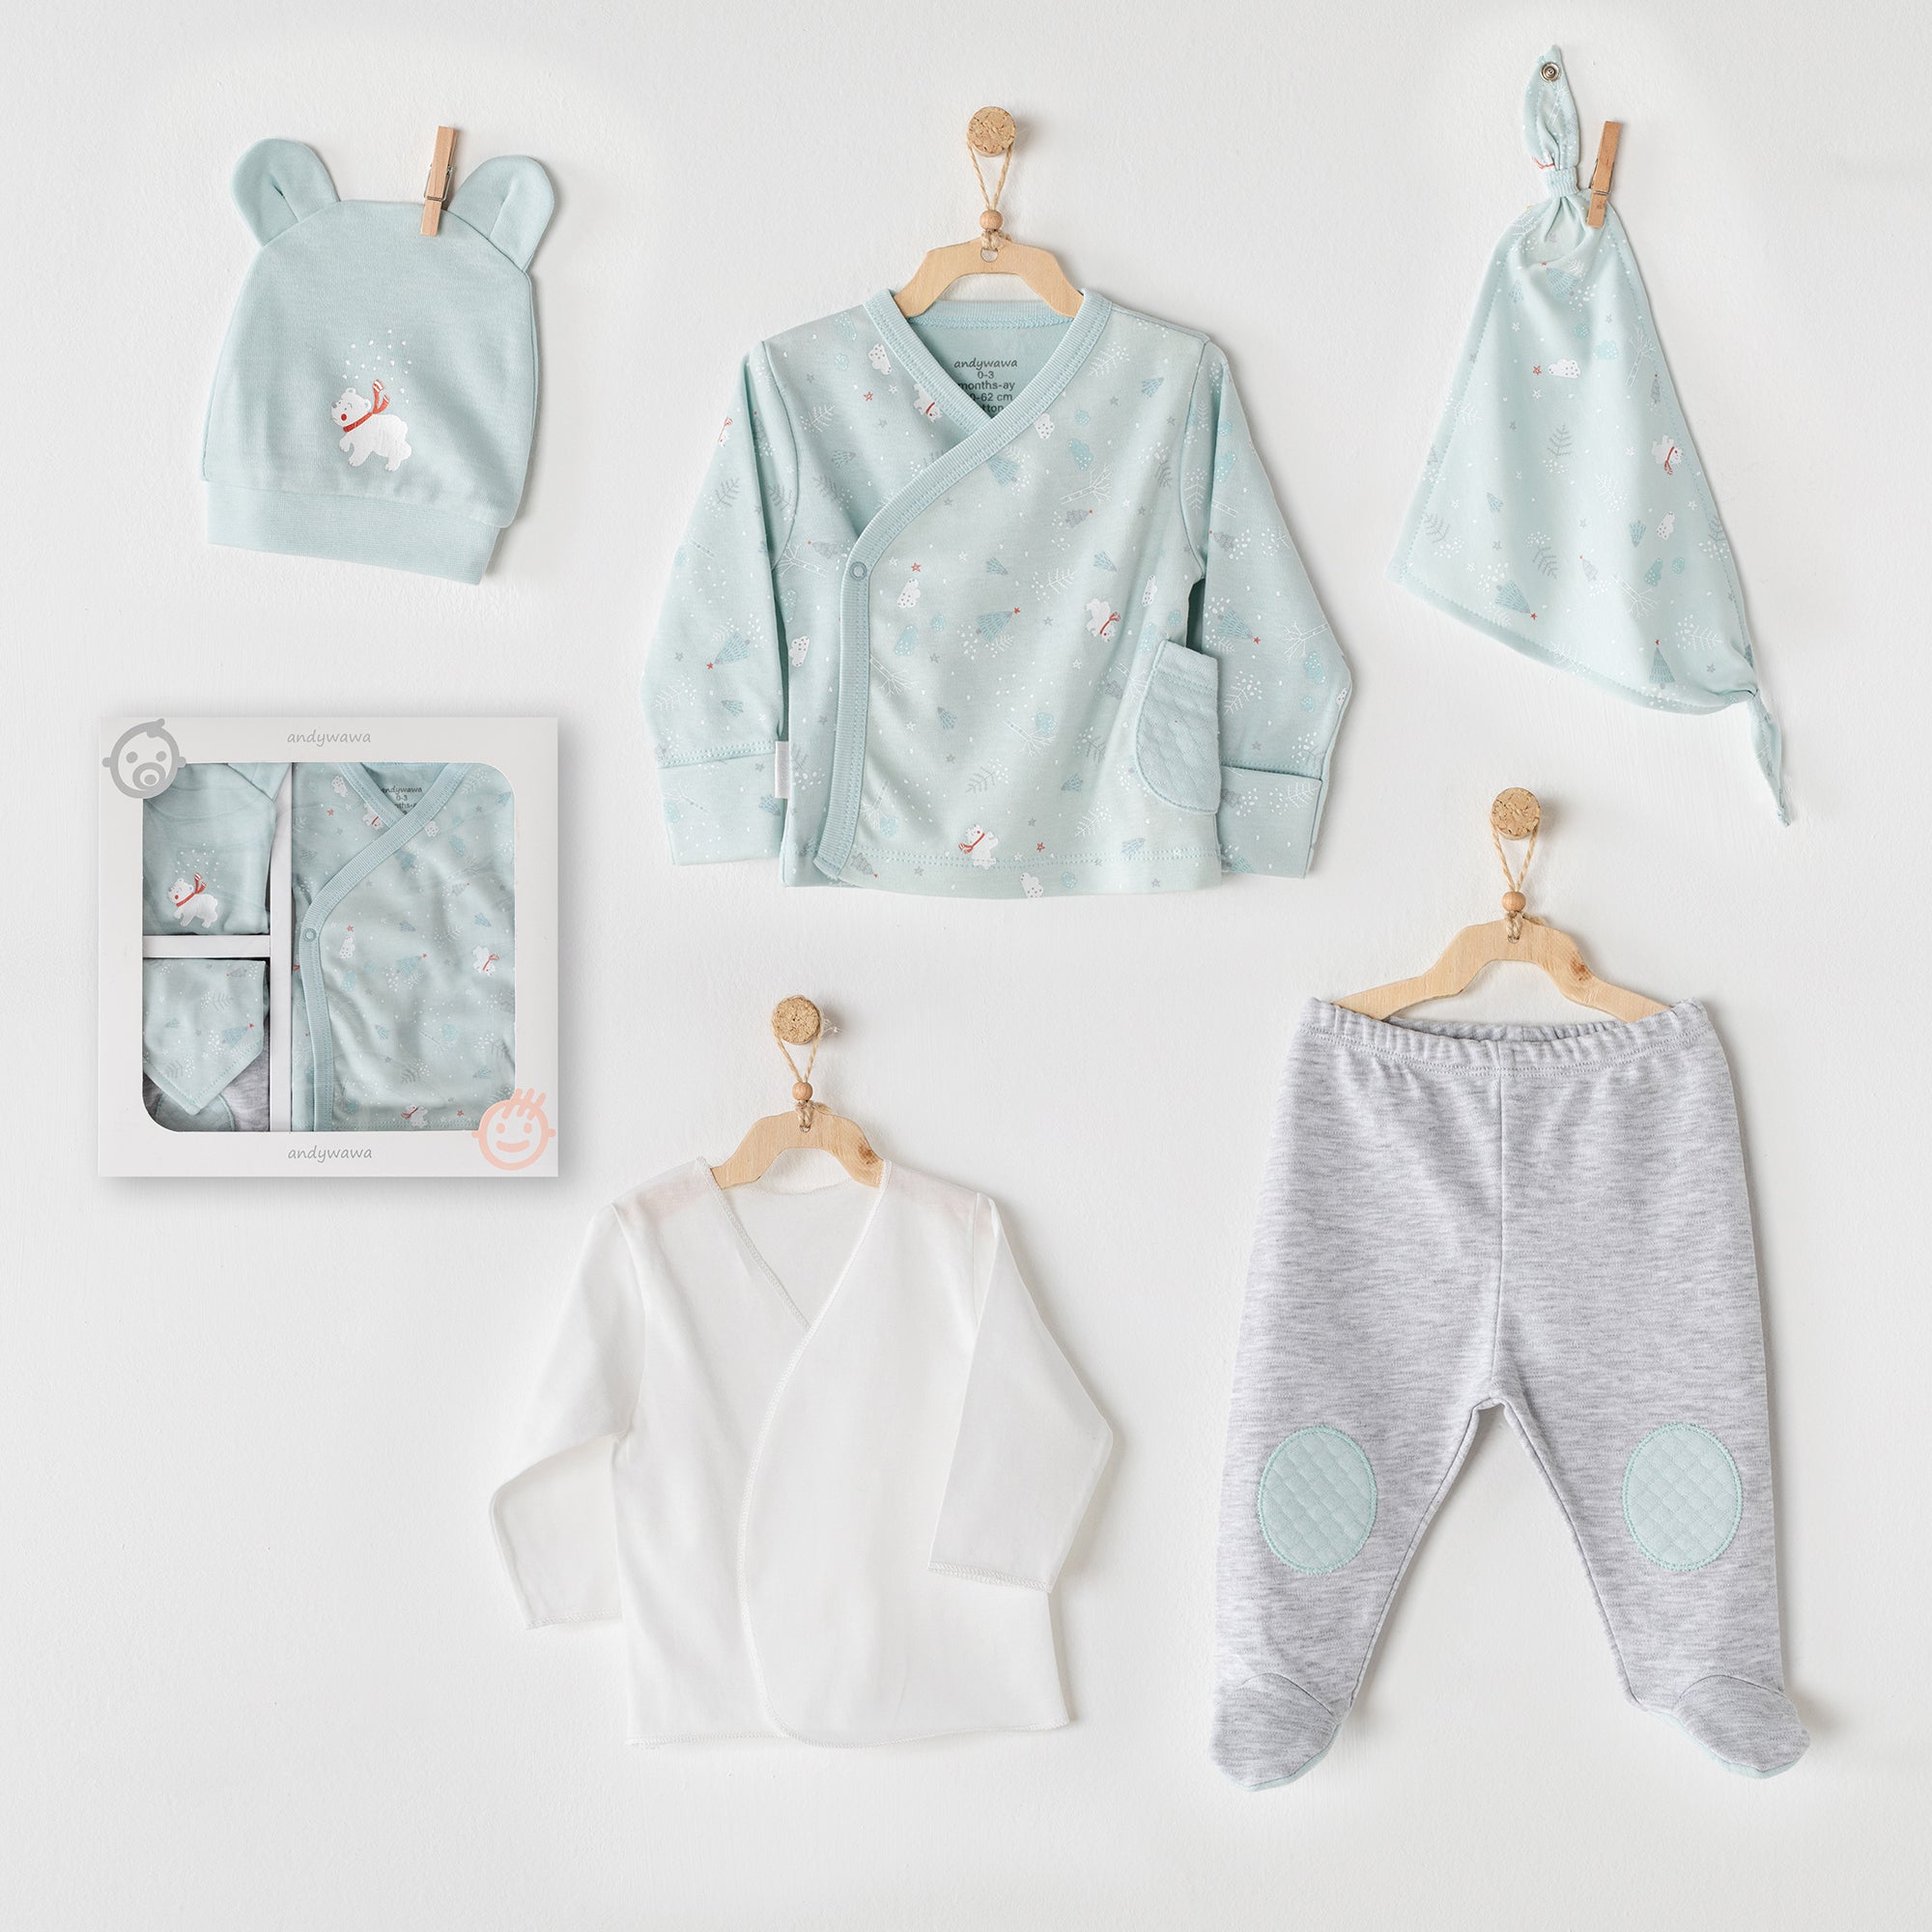 New born 5 pieces hospital set - New born 5 pieces hospital set - 0-3 Months - Andywawa - Melymod